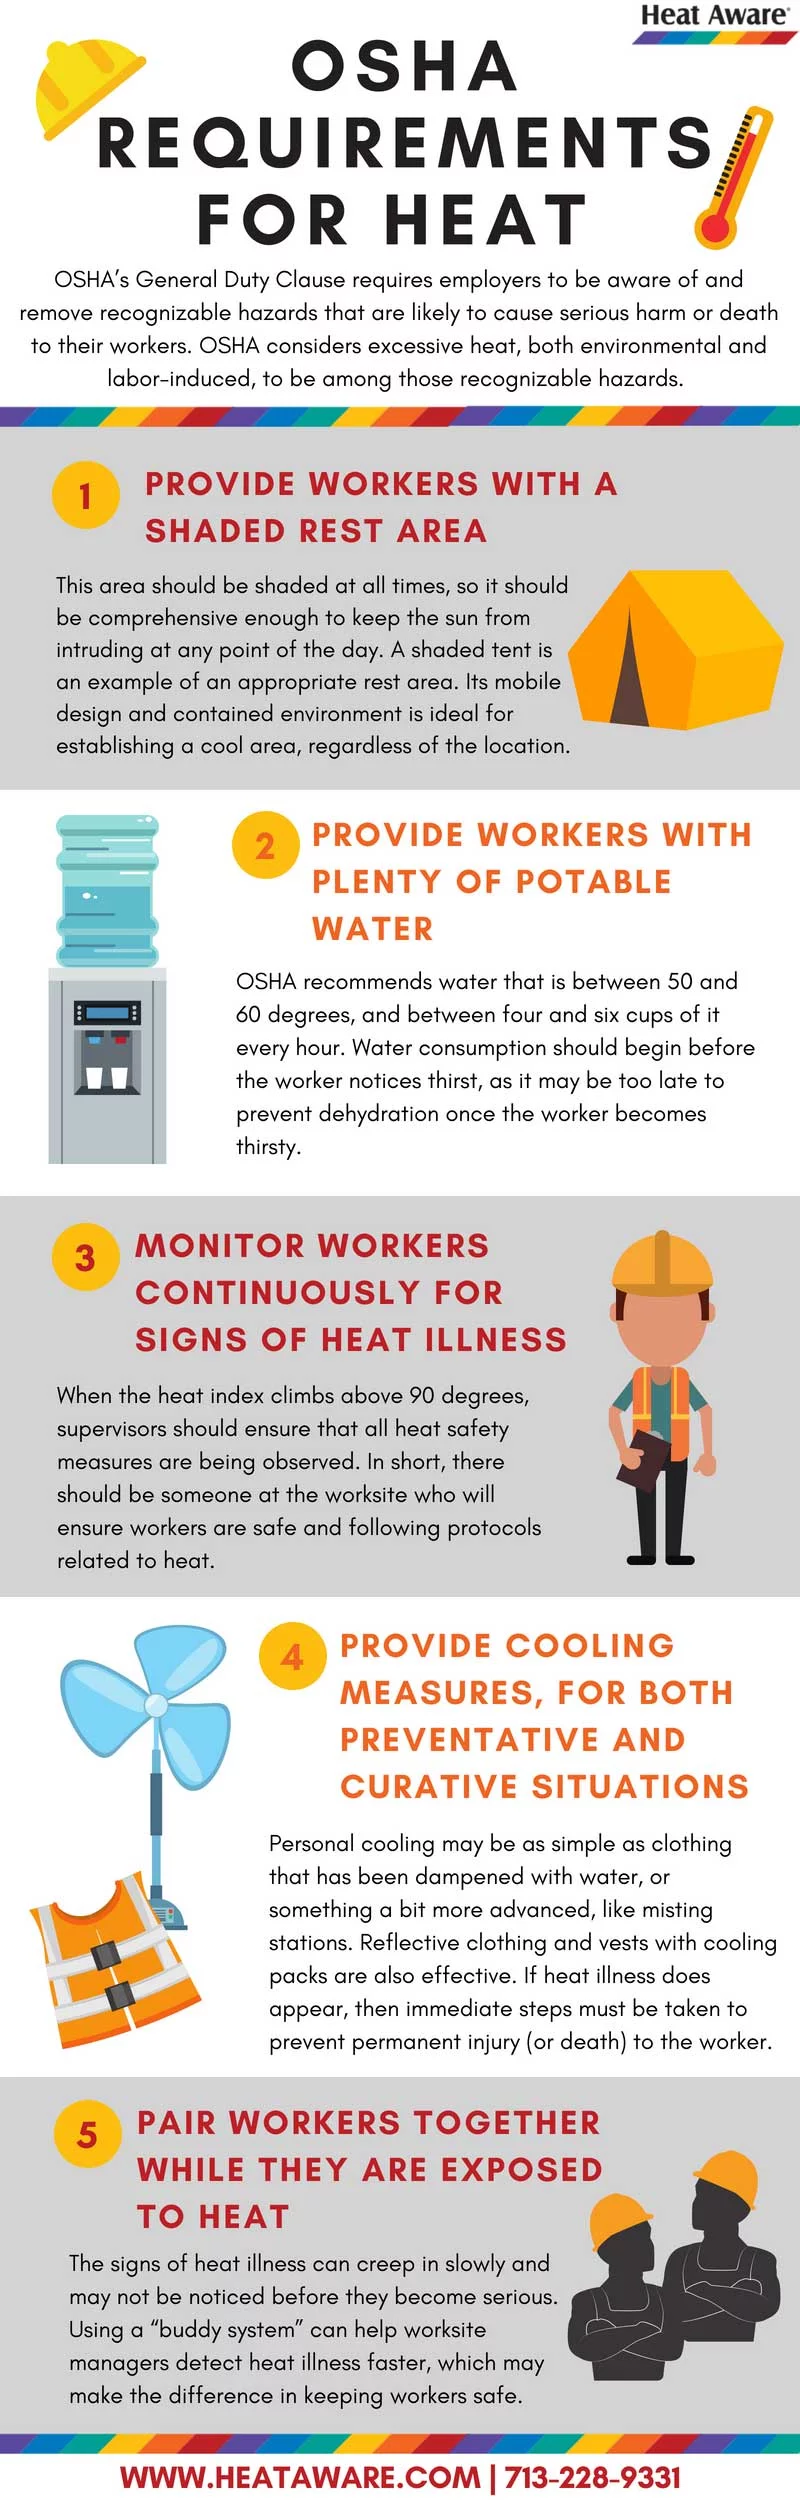 OSHA Requirements For Heat Safety